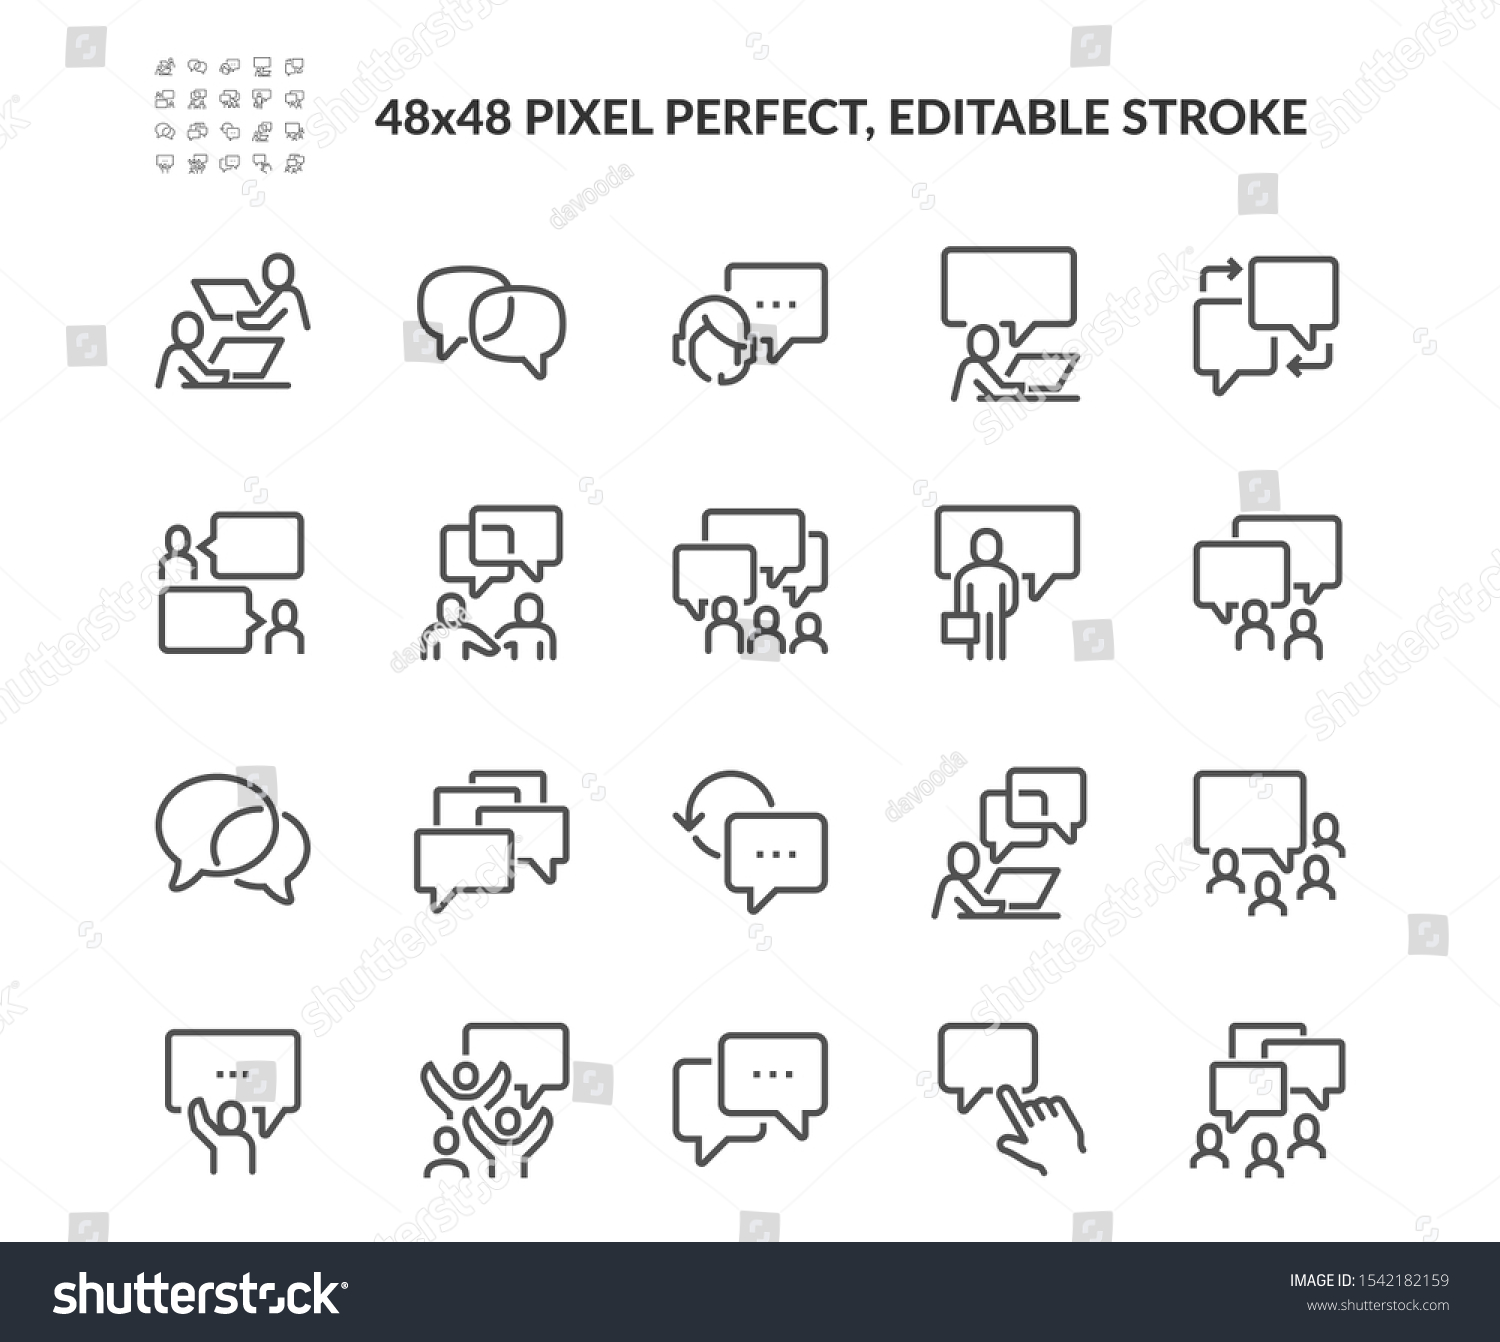 Simple Set of Business Communication Related Vector Line Icons. Contains such Icons as Meeting, Conference Call, Agreement, Chat and more. Editable Stroke. 48x48 Pixel Perfect. #1542182159